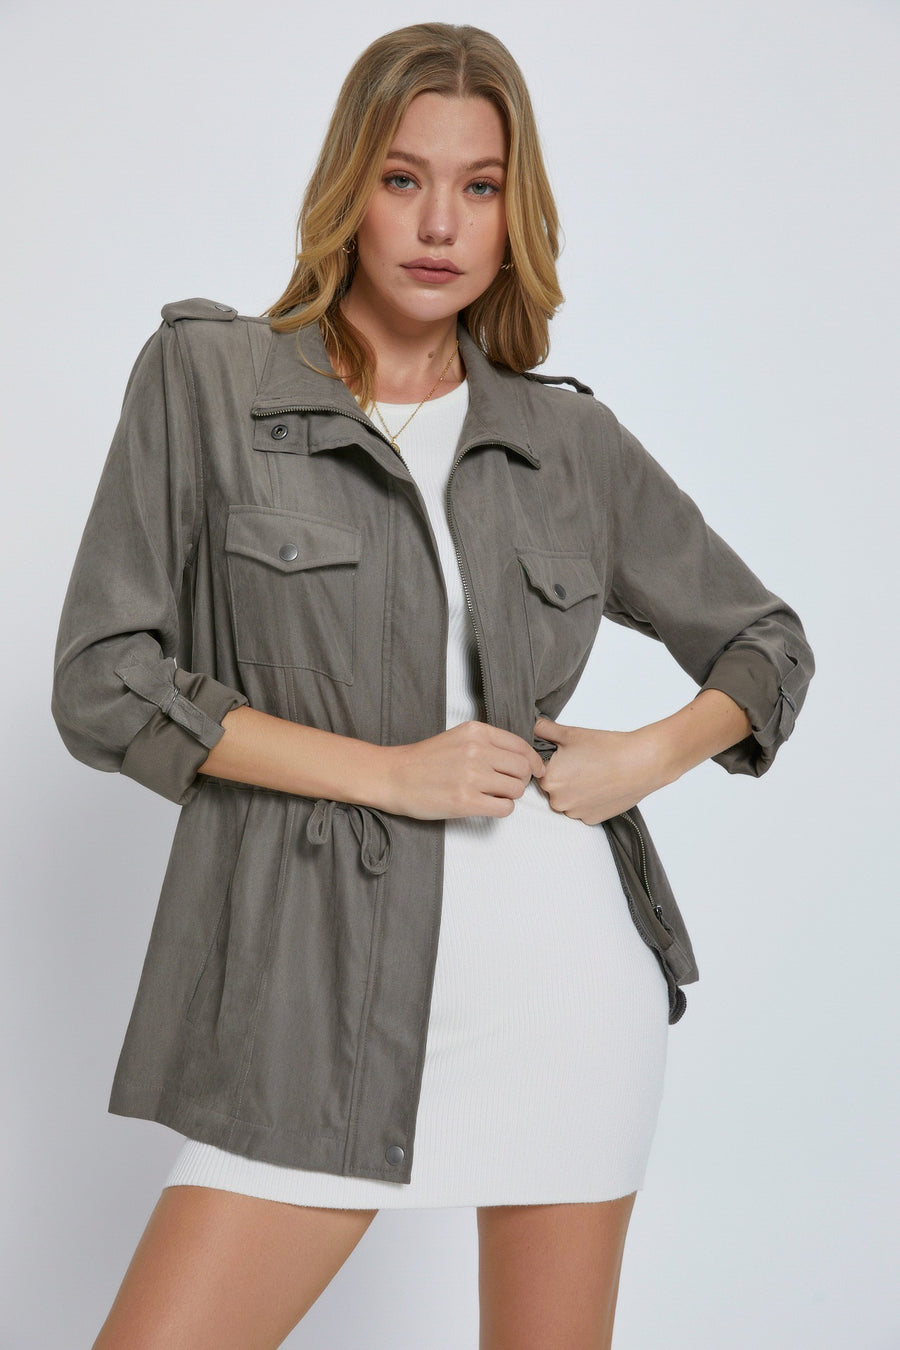 Grey utility jacket with drawstring at waist and cuffed sleeves.